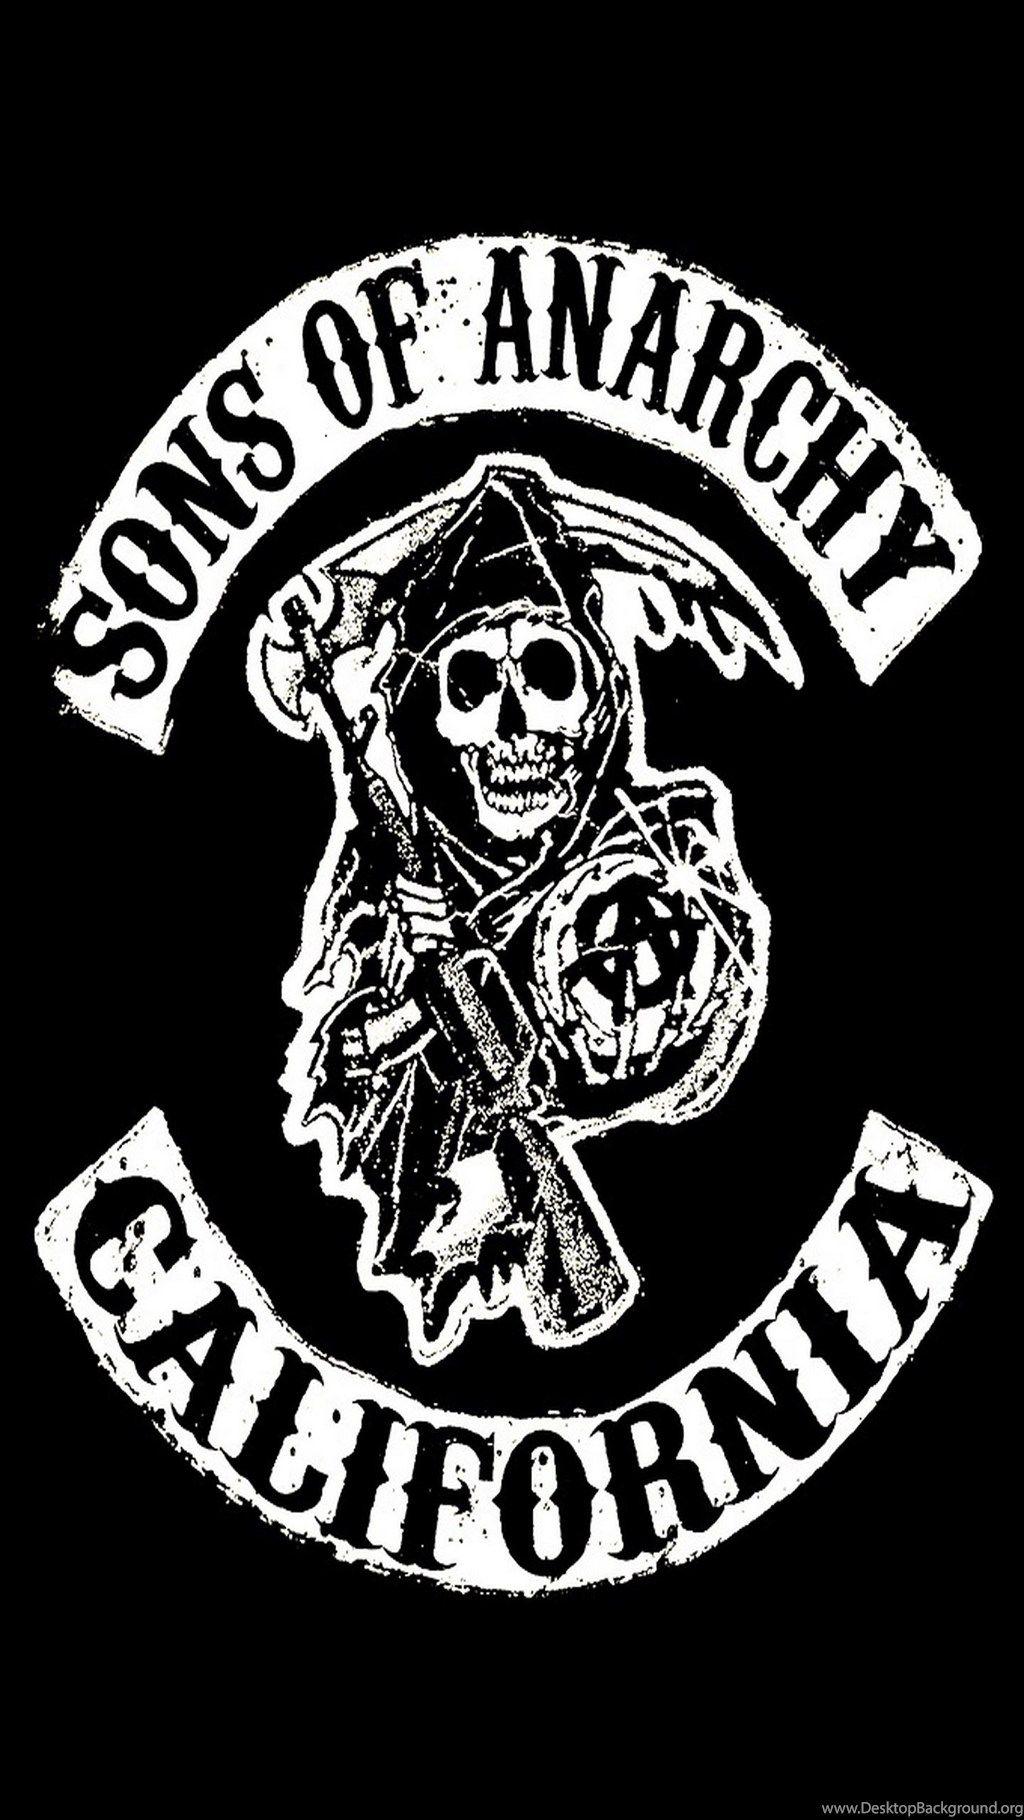 Sons Of Anarchy Wallpaper Galaxy S5 Desktop Background